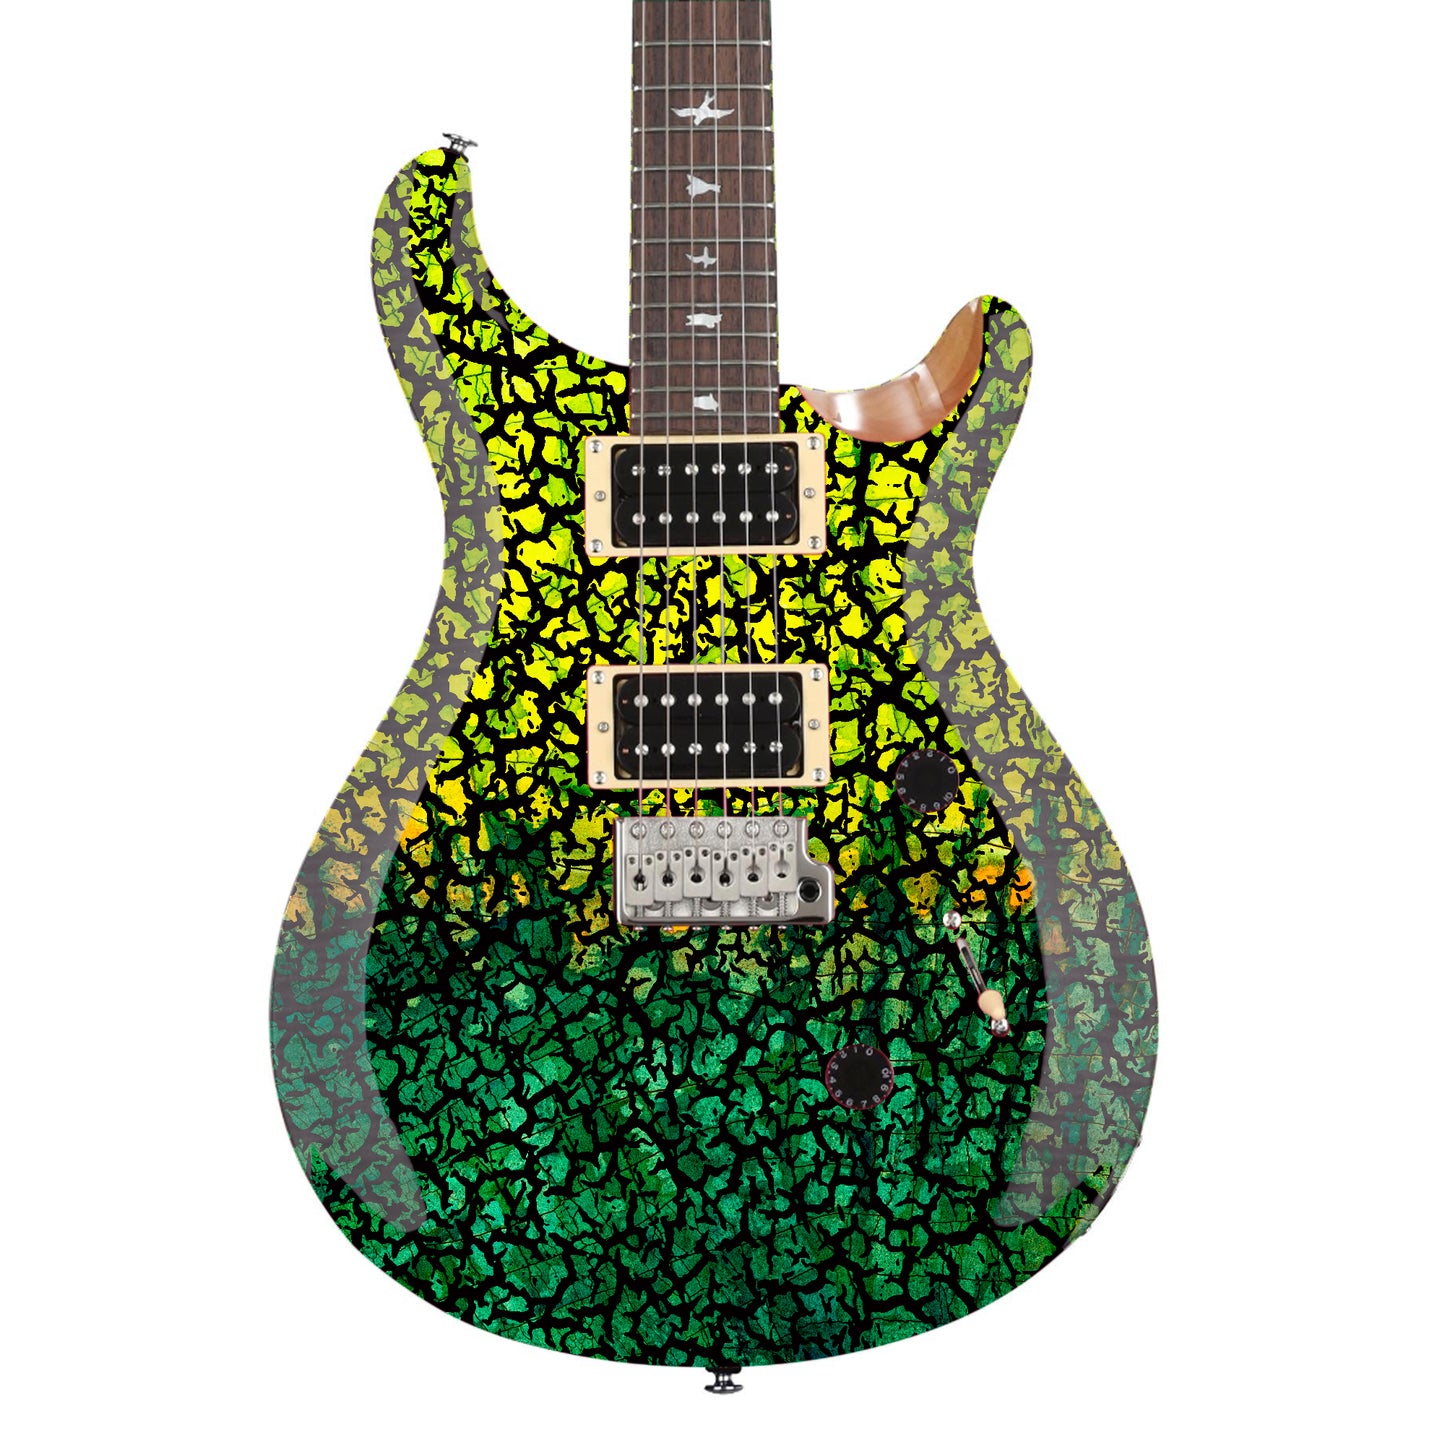 The Crackle Selection Guitar/Bass Vinyl Skin Wrap Decal Sticker Skin. Toxic  GS204